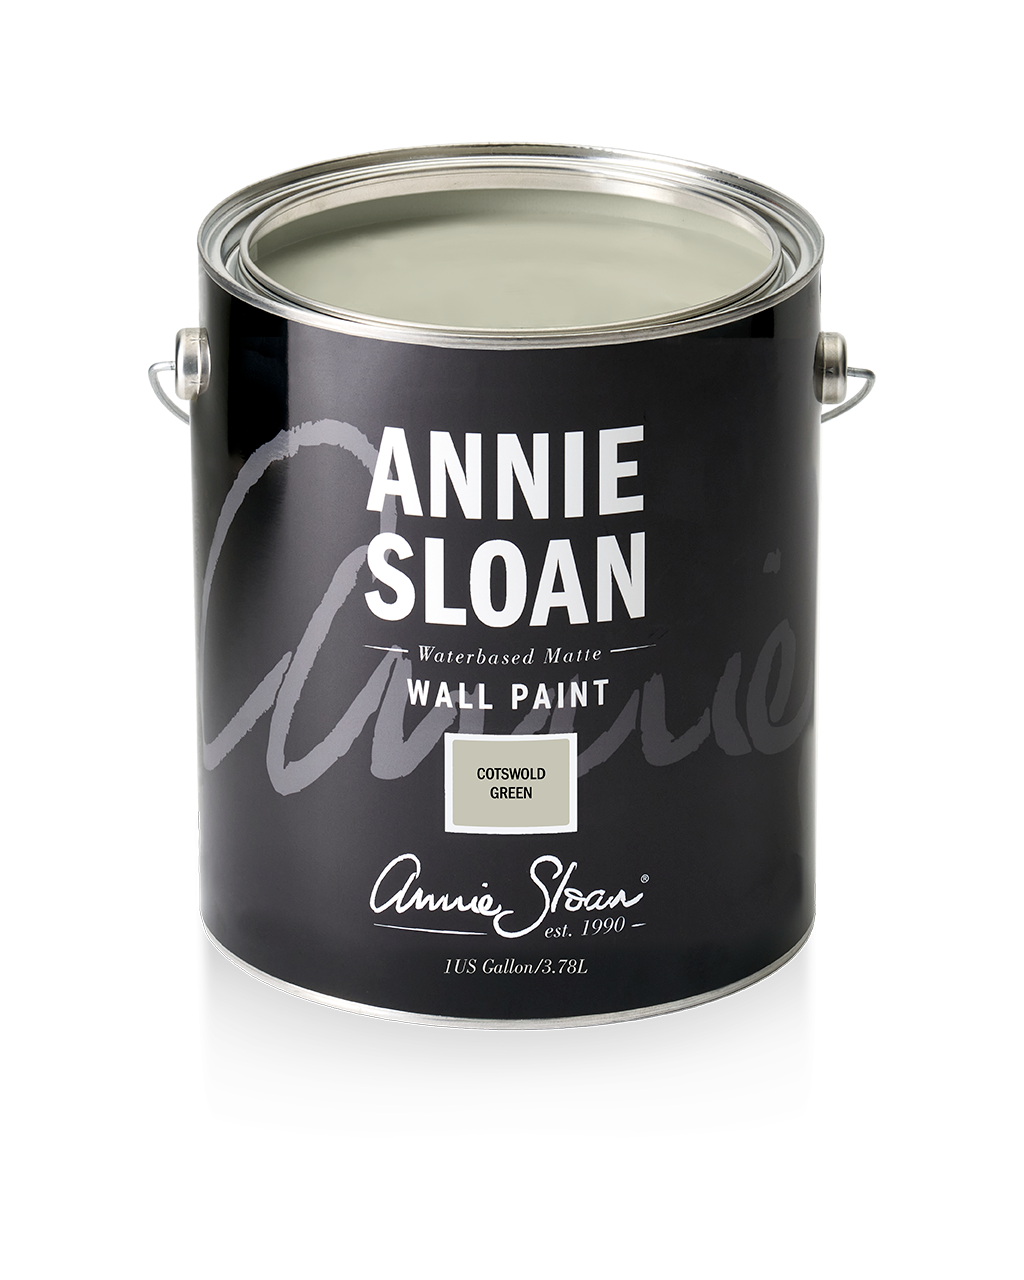 Annie Sloan Wall Paint Cotswold Green, 1 Gallon